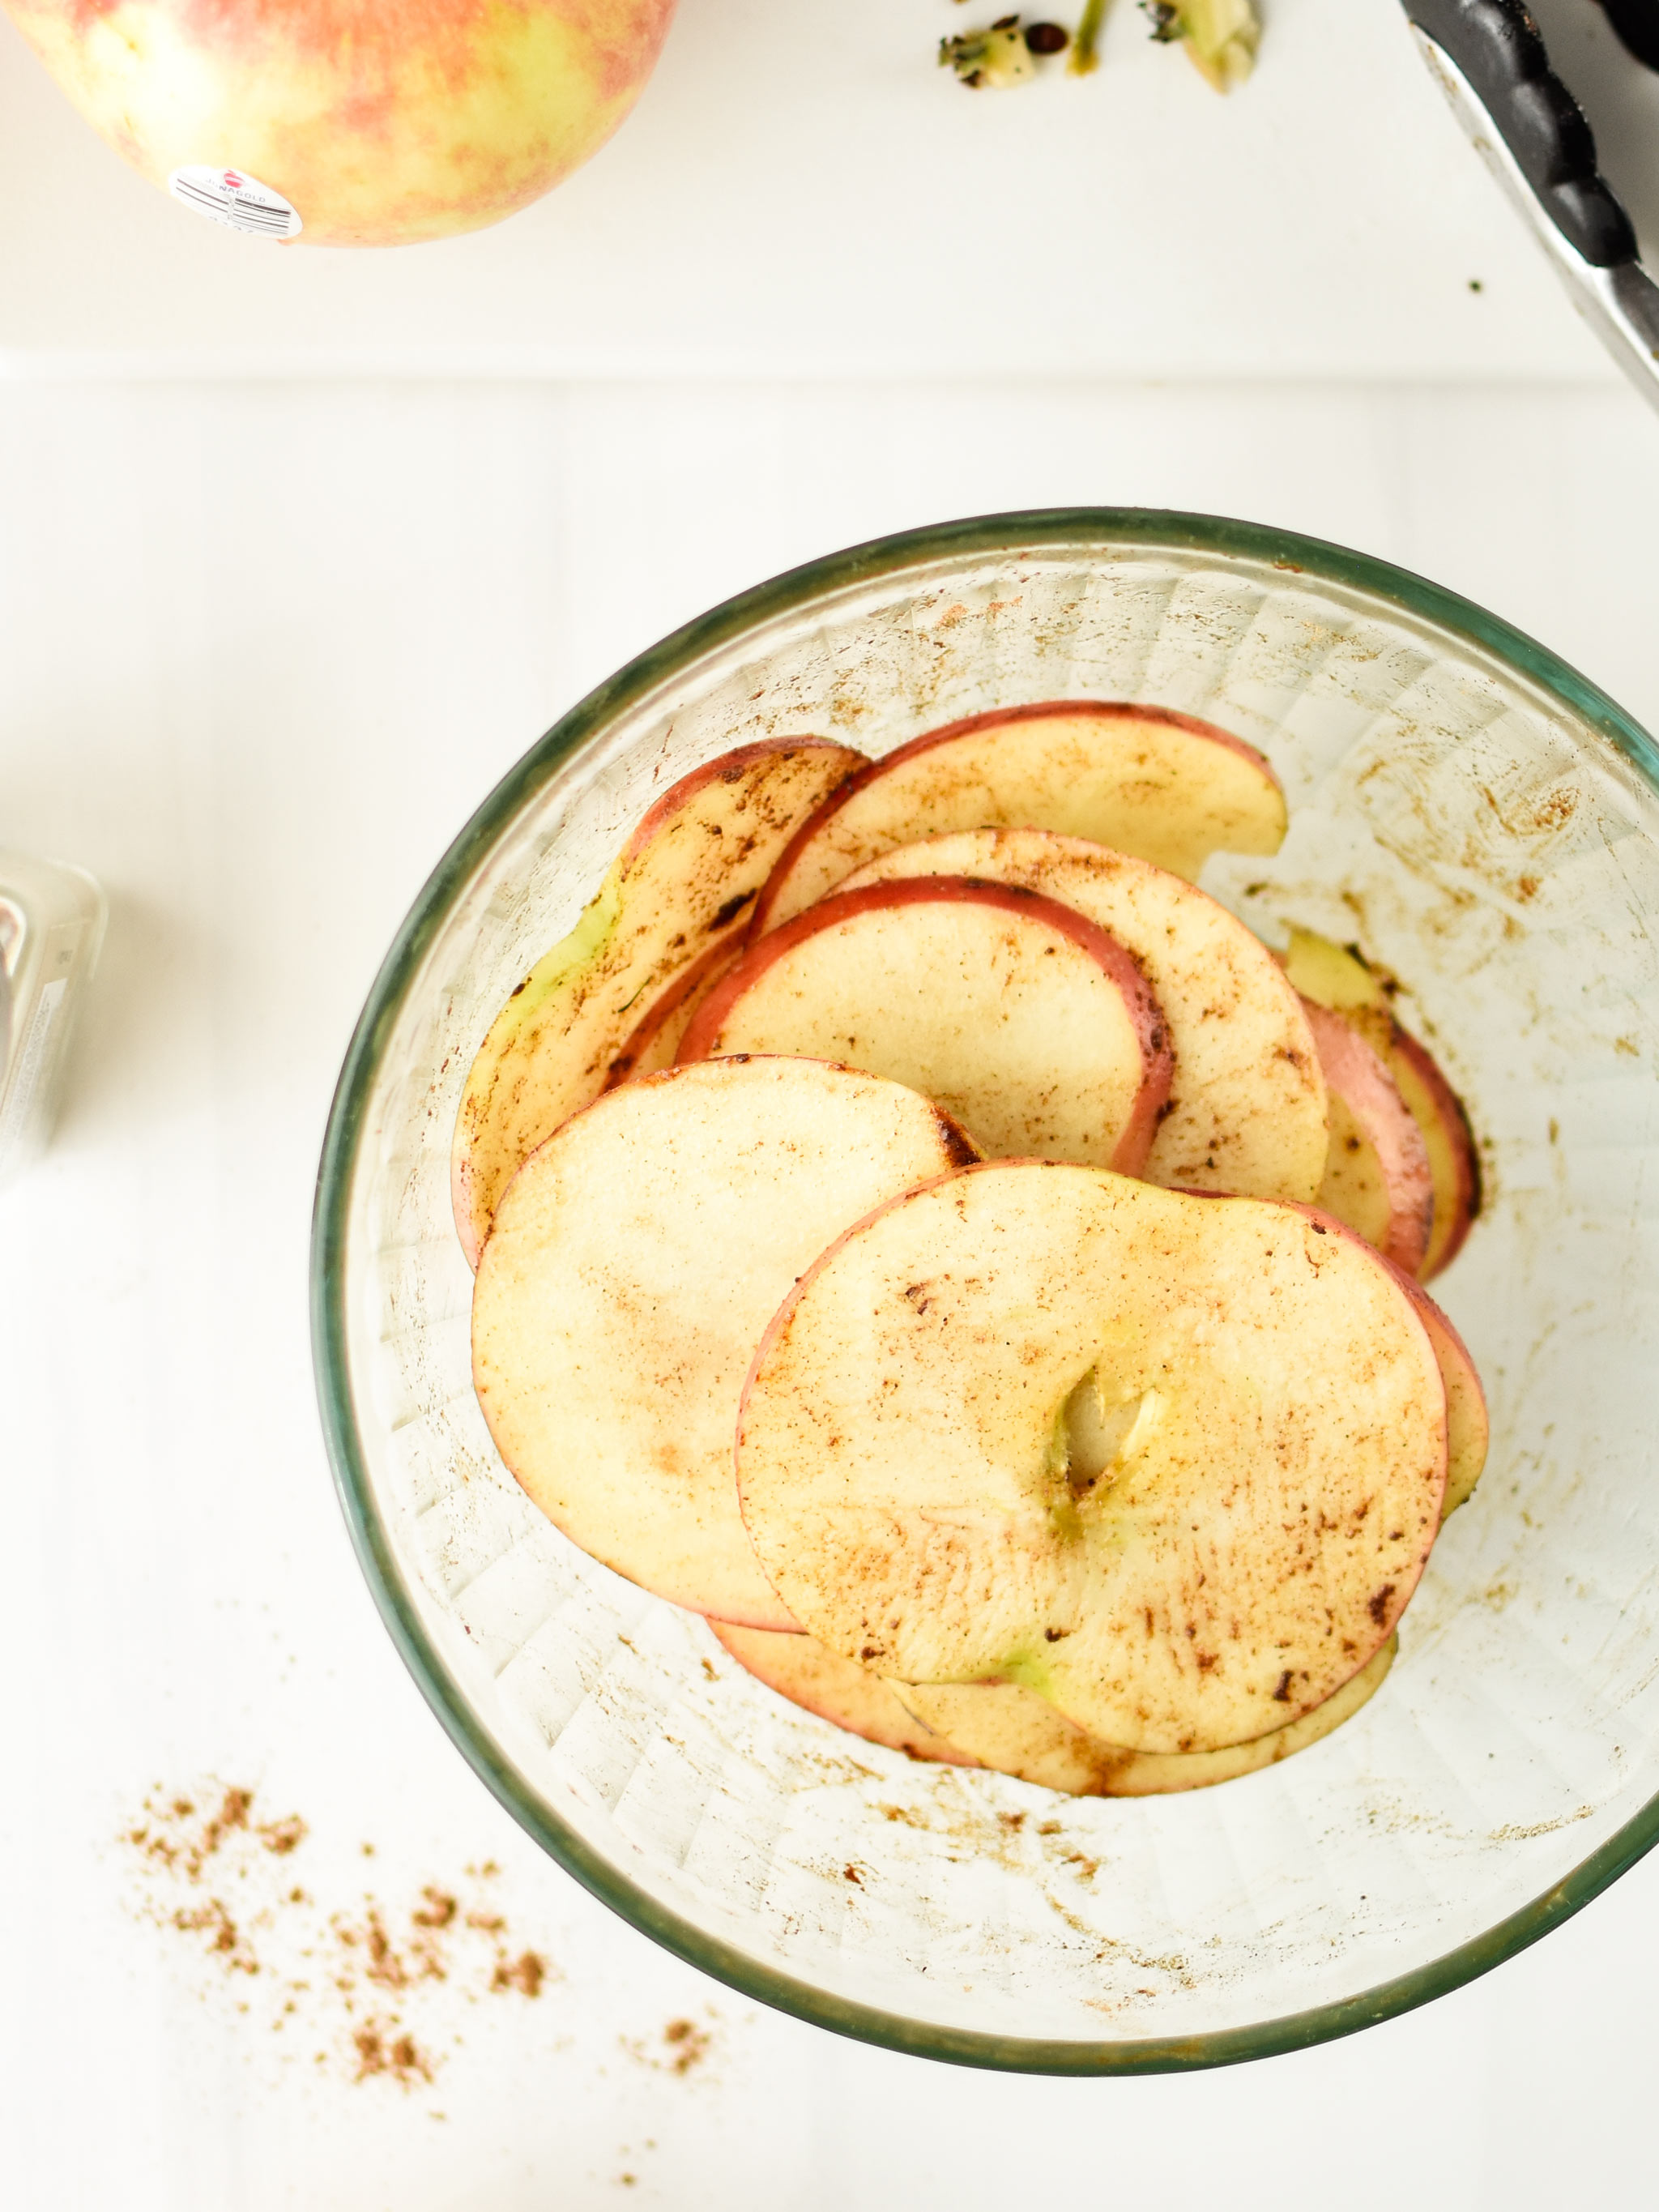 Season apple slices with cinnamon to make apple chips in an air fryer